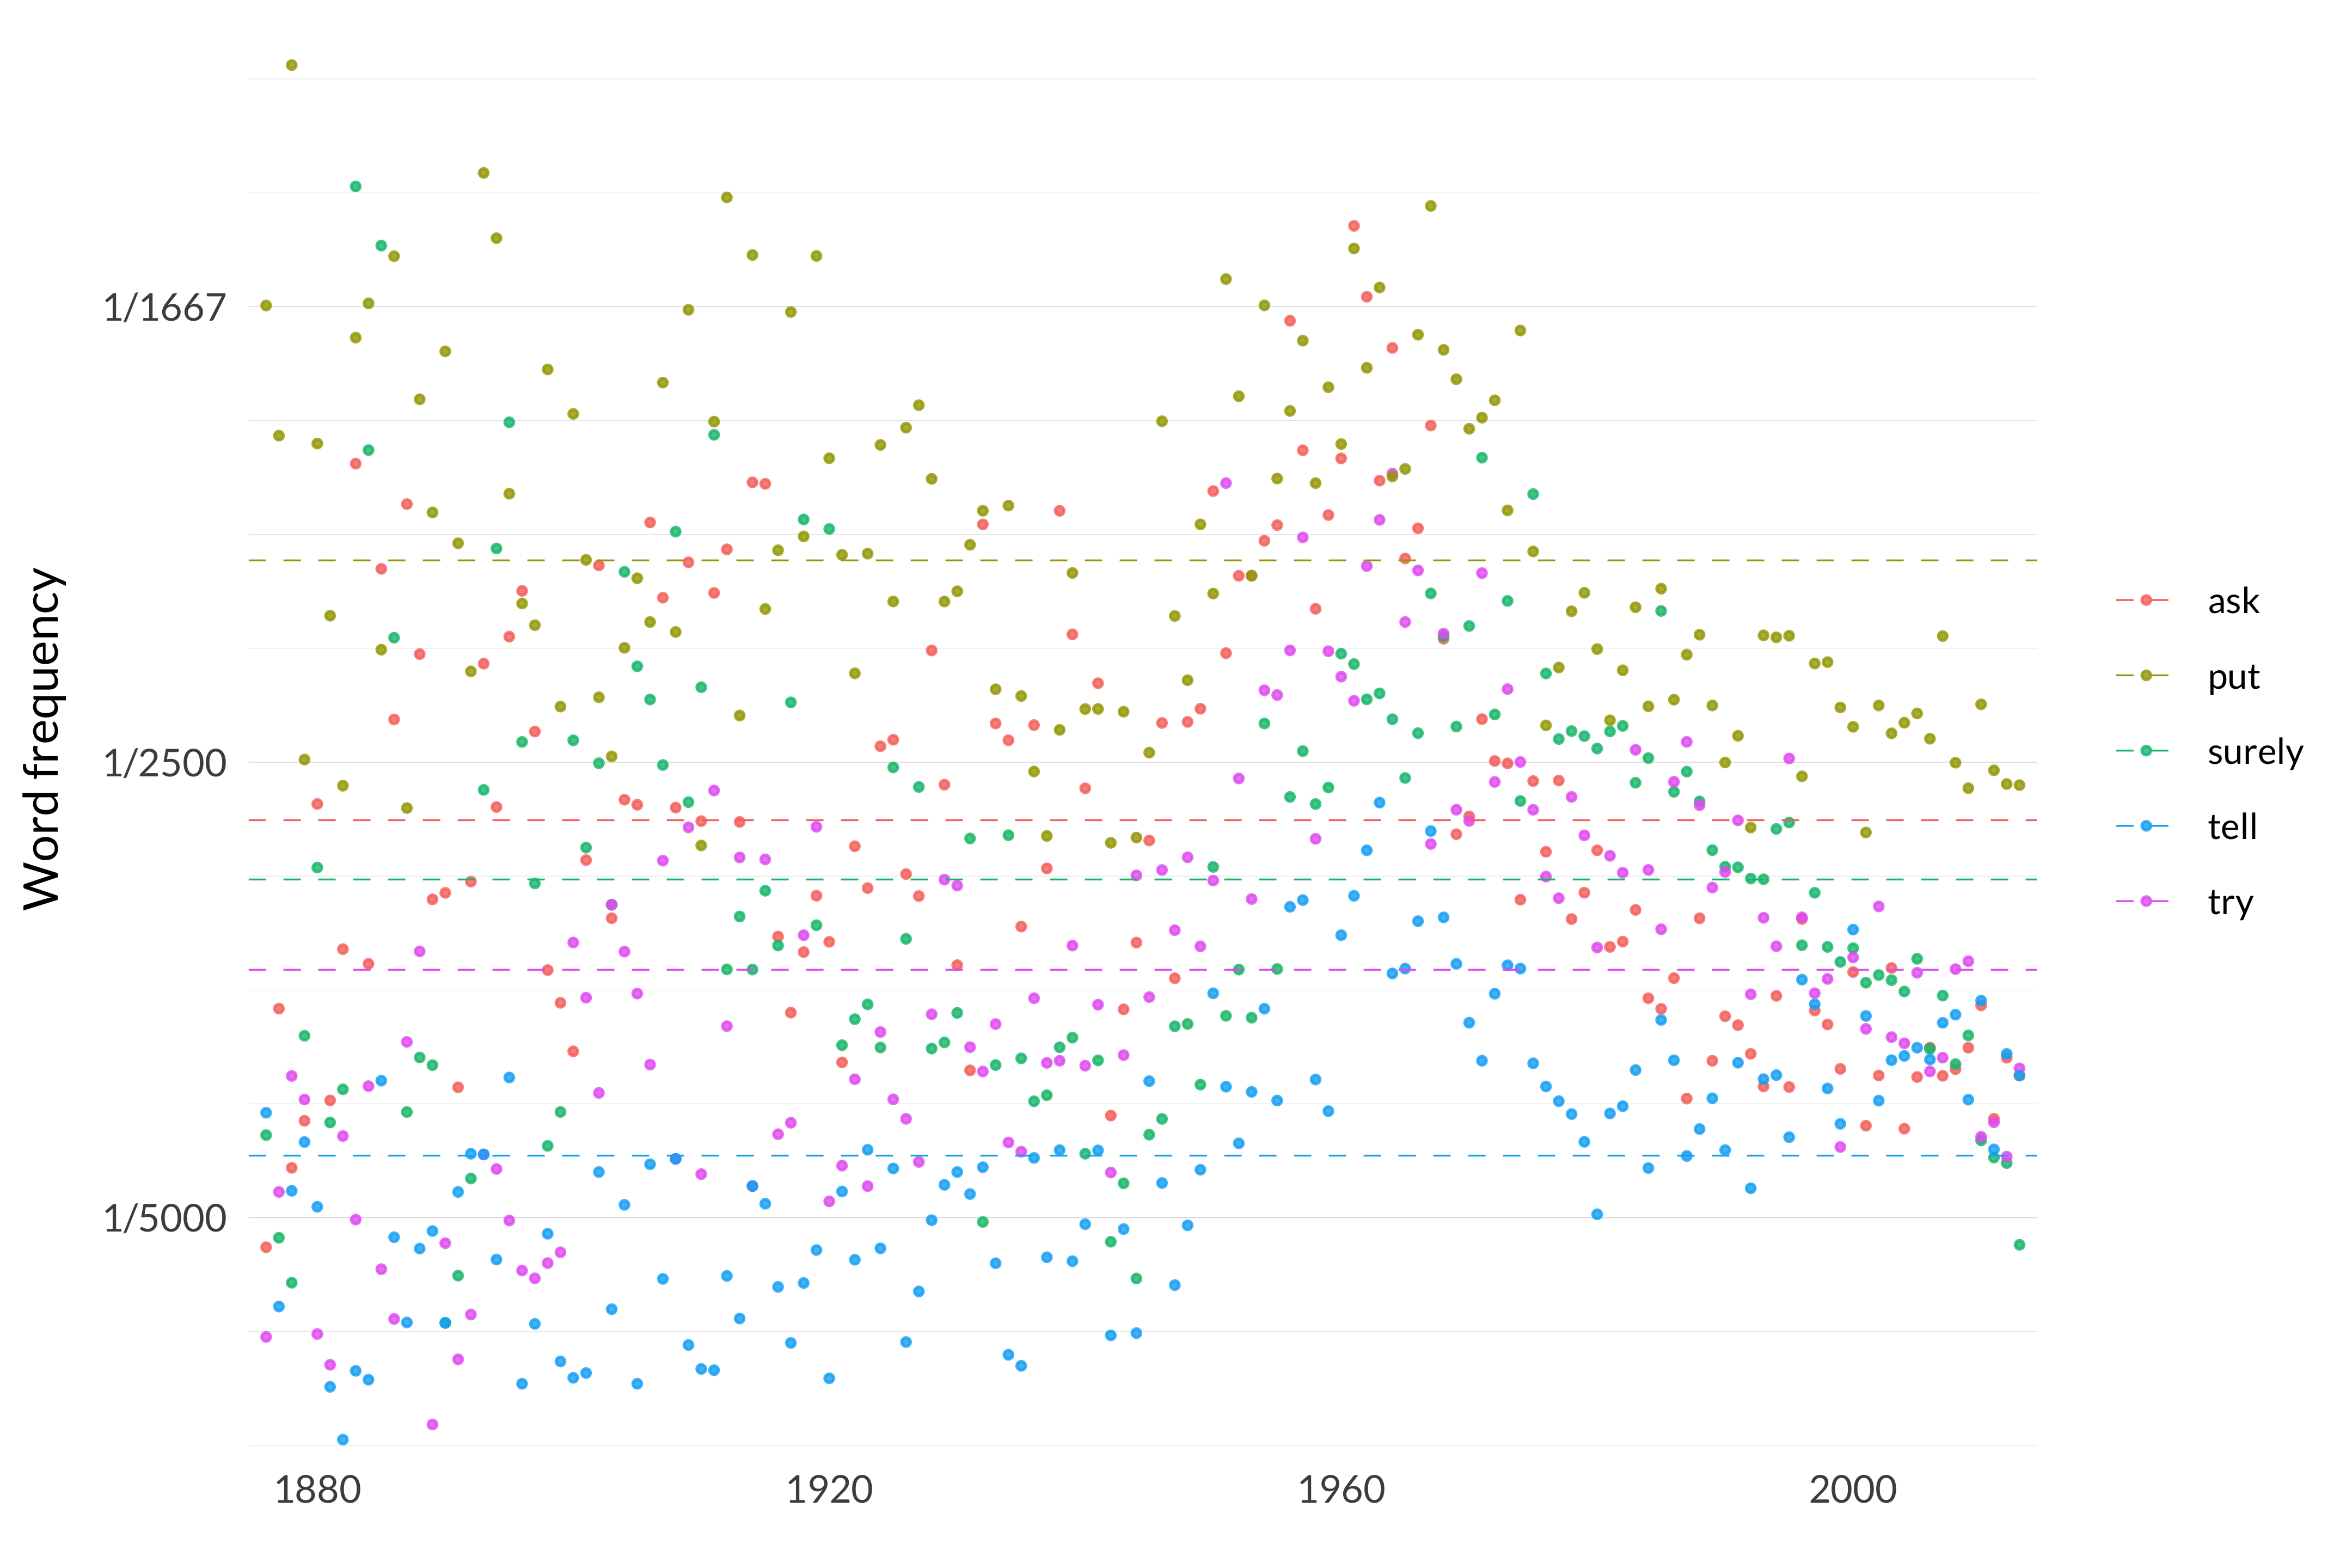 A scatterplot showing the frequency of the words ask, surely, try, put, tell. The word ask appears, on average across the years, 375 times per million words, and in the median year, it appears 359 times per million words. Its most frequent occurrence is in 1961 when it appears 635 times per million words, and its least frequent occurrence is in 1876 when it appears 187 times per million words. The word surely appears, on average across the years, 349 times per million words, and in the median year, it appears 348 times per million words. Its most frequent occurrence is in 1883 when it appears 653 times per million words, and its least frequent occurrence is in 1890 when it appears 154 times per million words. The word try appears, on average across the years, 309 times per million words, and in the median year, it appears 308 times per million words. Its most frequent occurrence is in 1964 when it appears 527 times per million words, and its least frequent occurrence is in 1889 when it appears 109 times per million words. The word put appears, on average across the years, 489 times per million words, and in the median year, it appears 472 times per million words. Its most frequent occurrence is in 1878 when it appears 706 times per million words, and its least frequent occurrence is in 1910 when it appears 363 times per million words. The word tell appears, on average across the years, 227 times per million words, and in the median year, it appears 228 times per million words. Its most frequent occurrence is in 1963 when it appears 382 times per million words, and its least frequent occurrence is in 1882 when it appears 103 times per million words. 